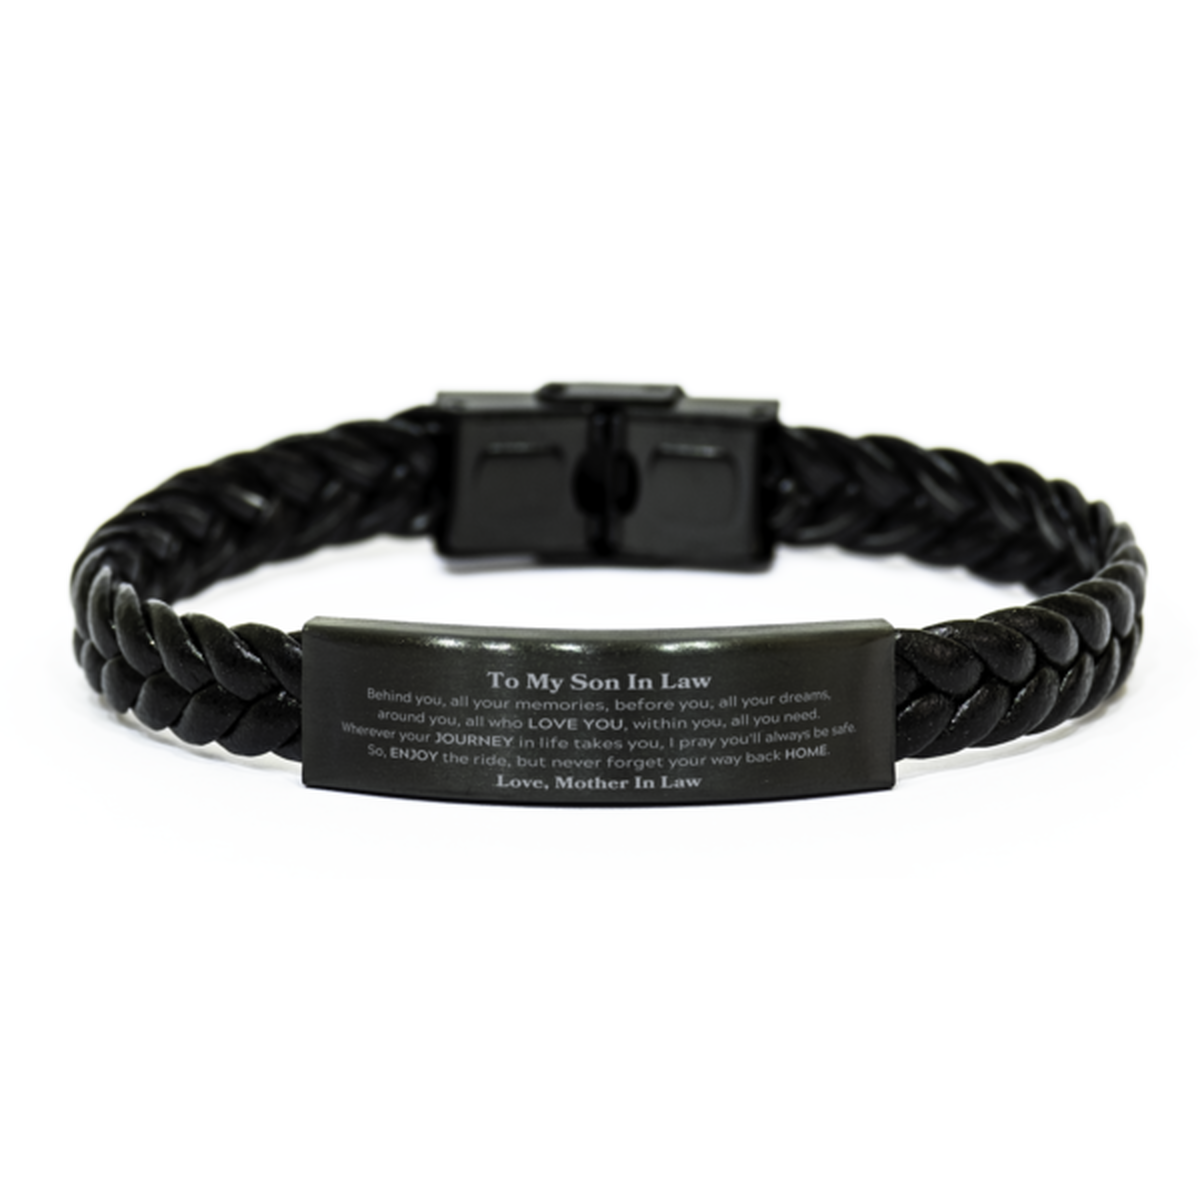 To My Son In Law Graduation Gifts from Mother In Law, Son In Law Braided Leather Bracelet Christmas Birthday Gifts for Son In Law Behind you, all your memories, before you, all your dreams. Love, Mother In Law